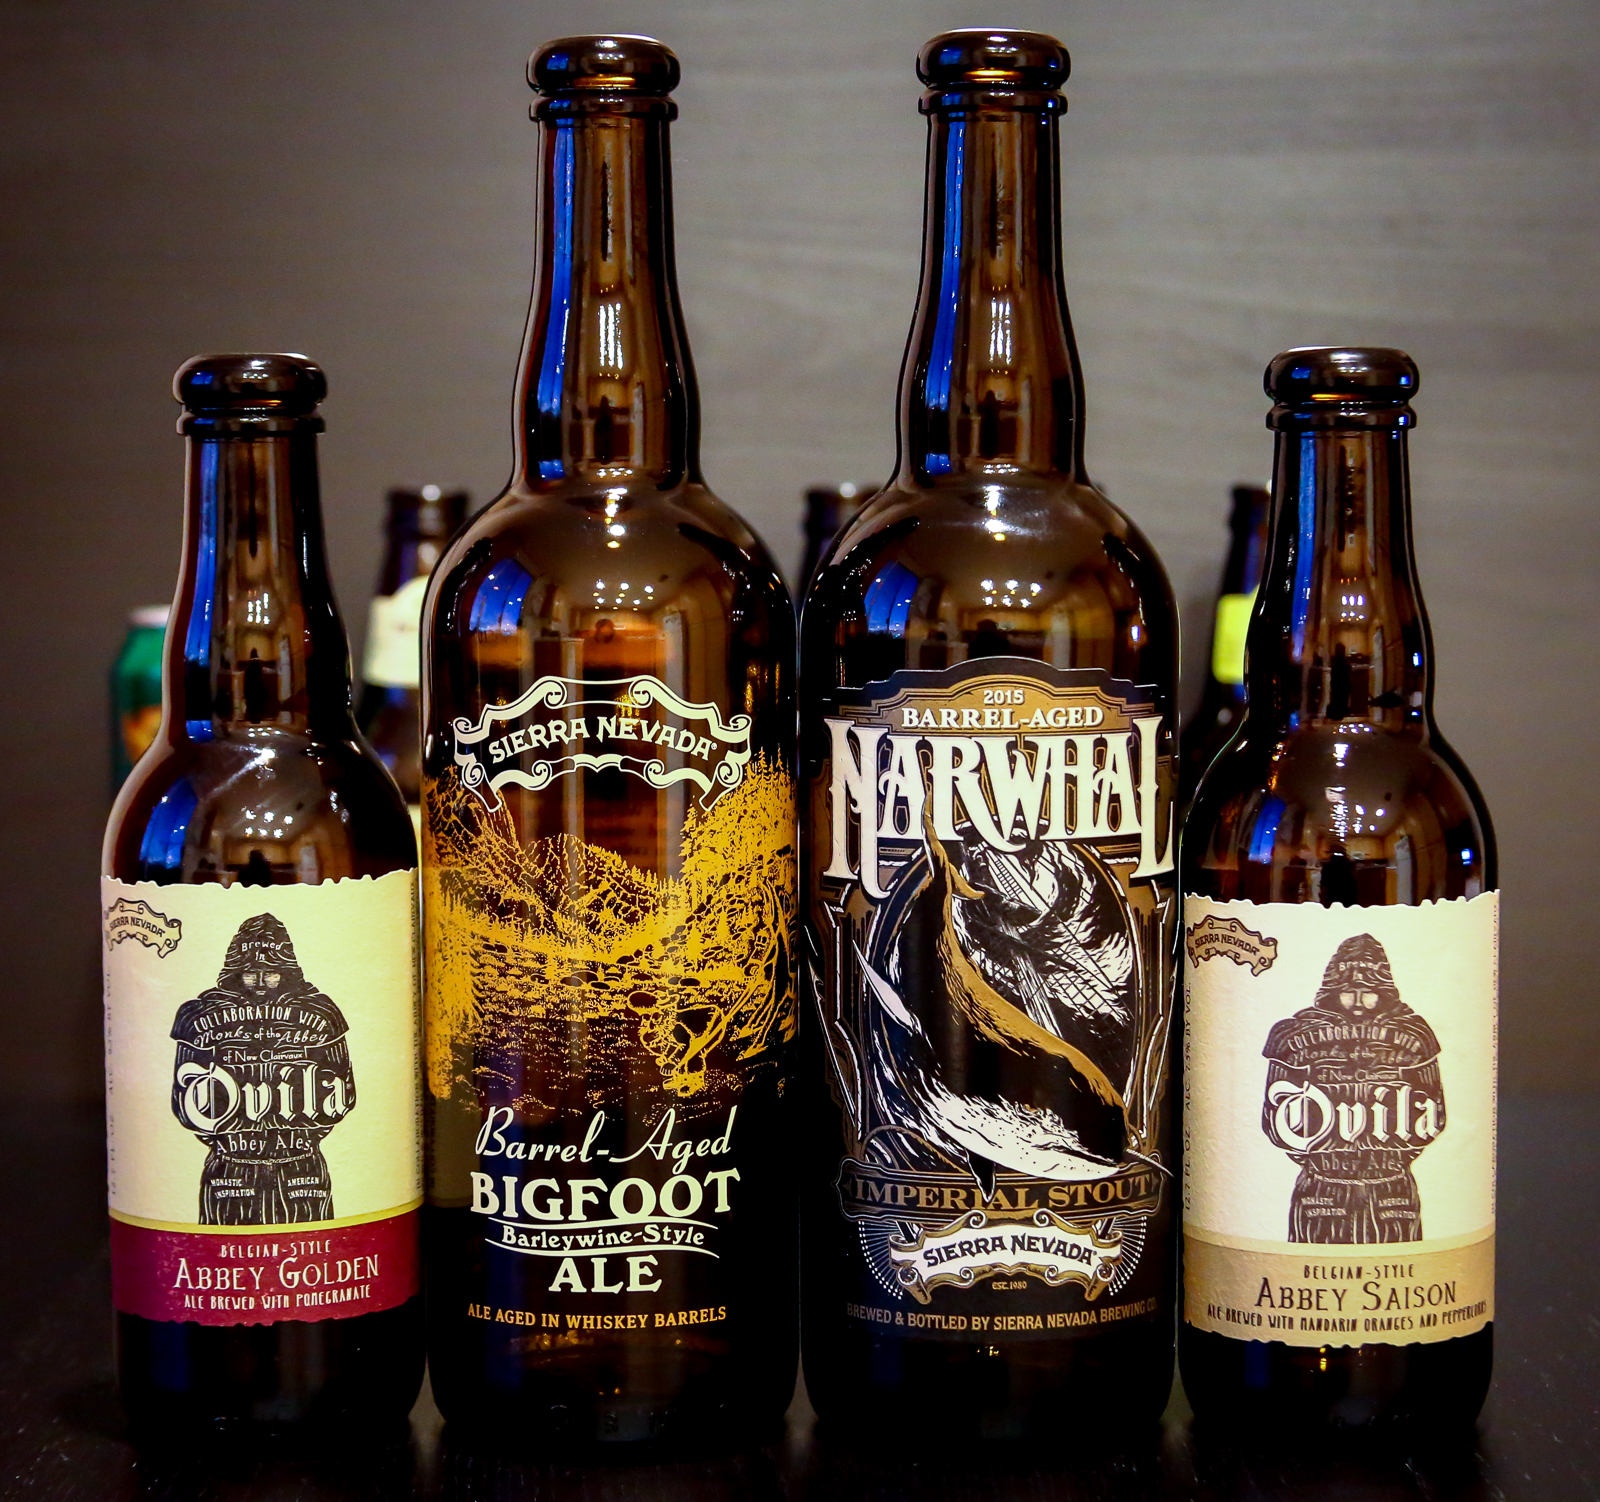 Sierra Nevada Brewing Co. Collaboration and Barrel-Aged Beers